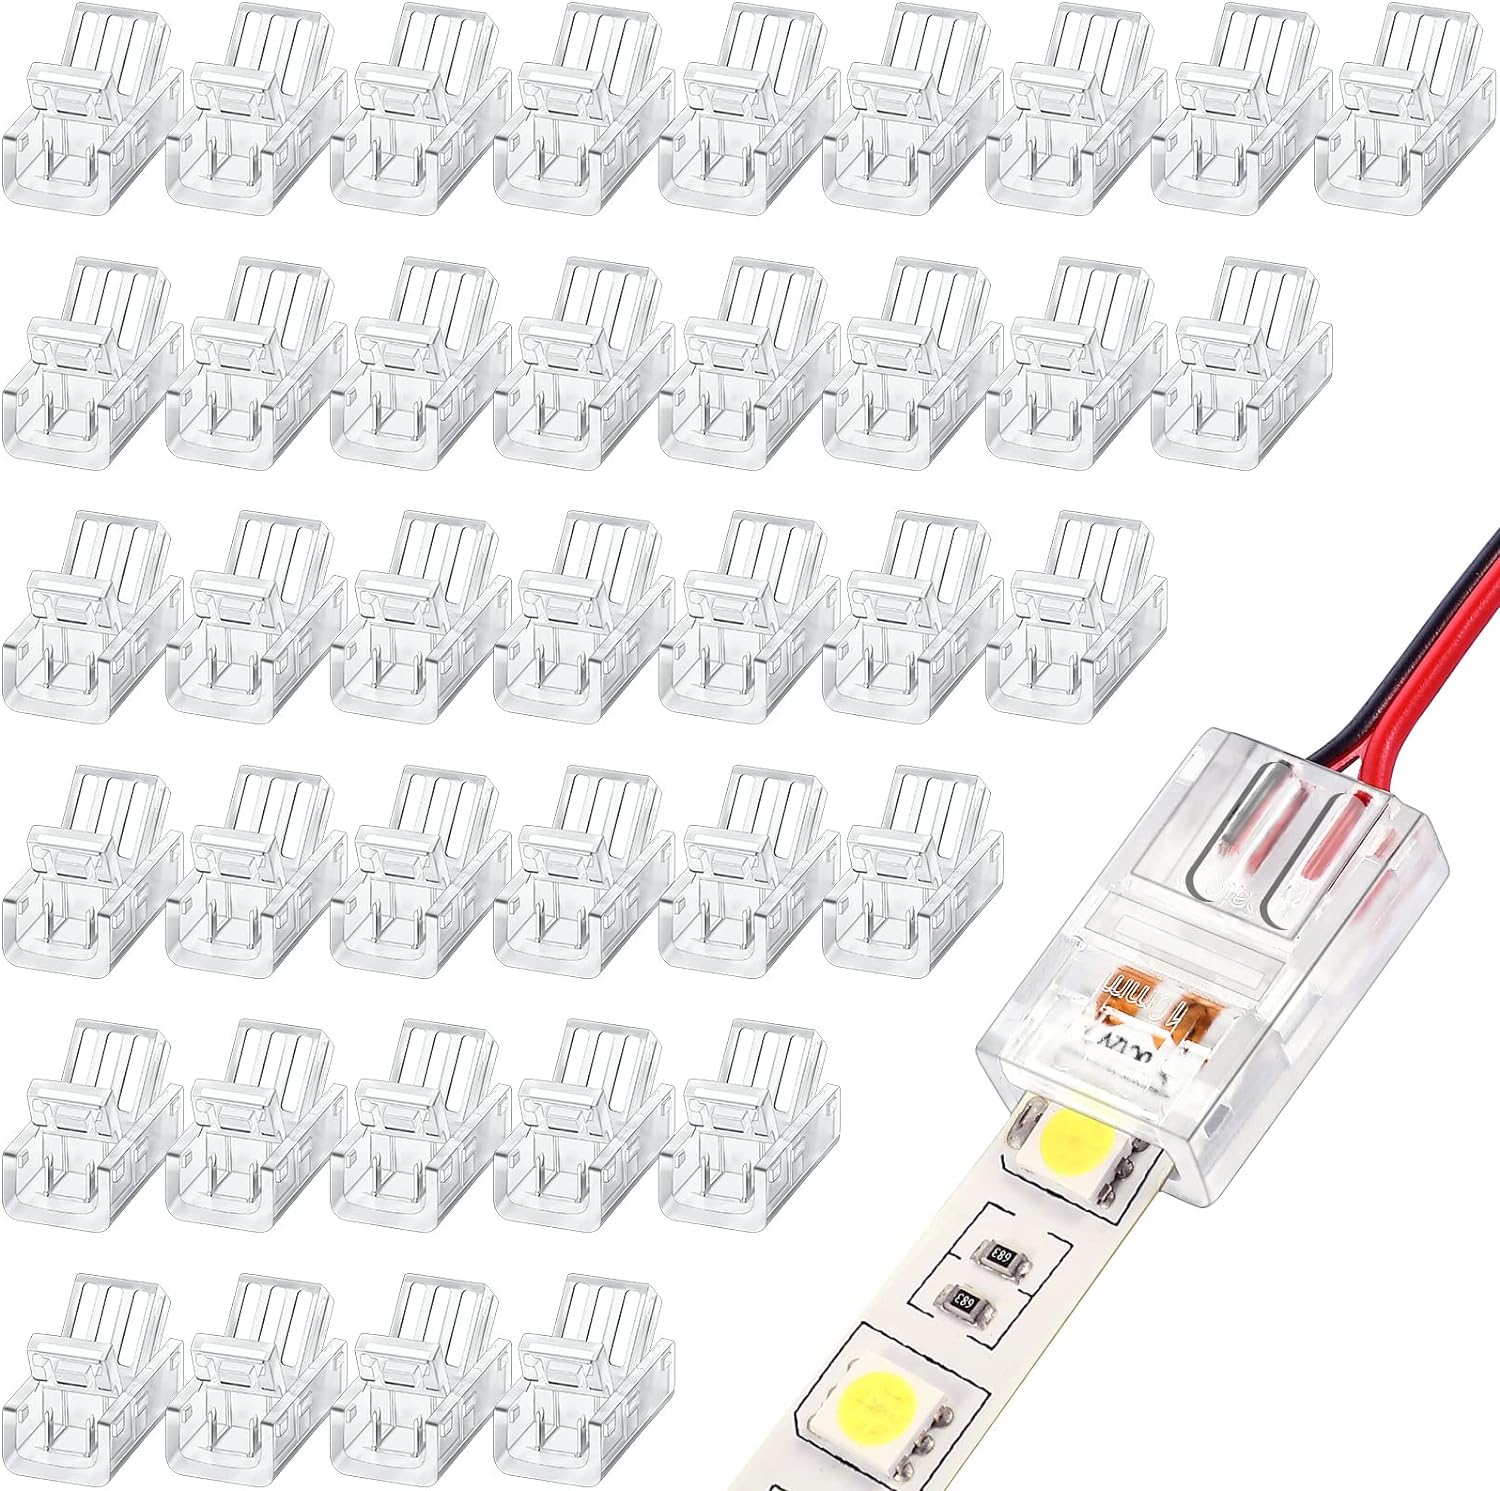 40 Pieces RGB LED Light Strip Connectors Unwired Gapless Solderless Adapter Terminal Extension Waterproof LED Light Adapter Transparent Led Strips Extensions, 5v 12v 24v (2 Pin, 8 mm)